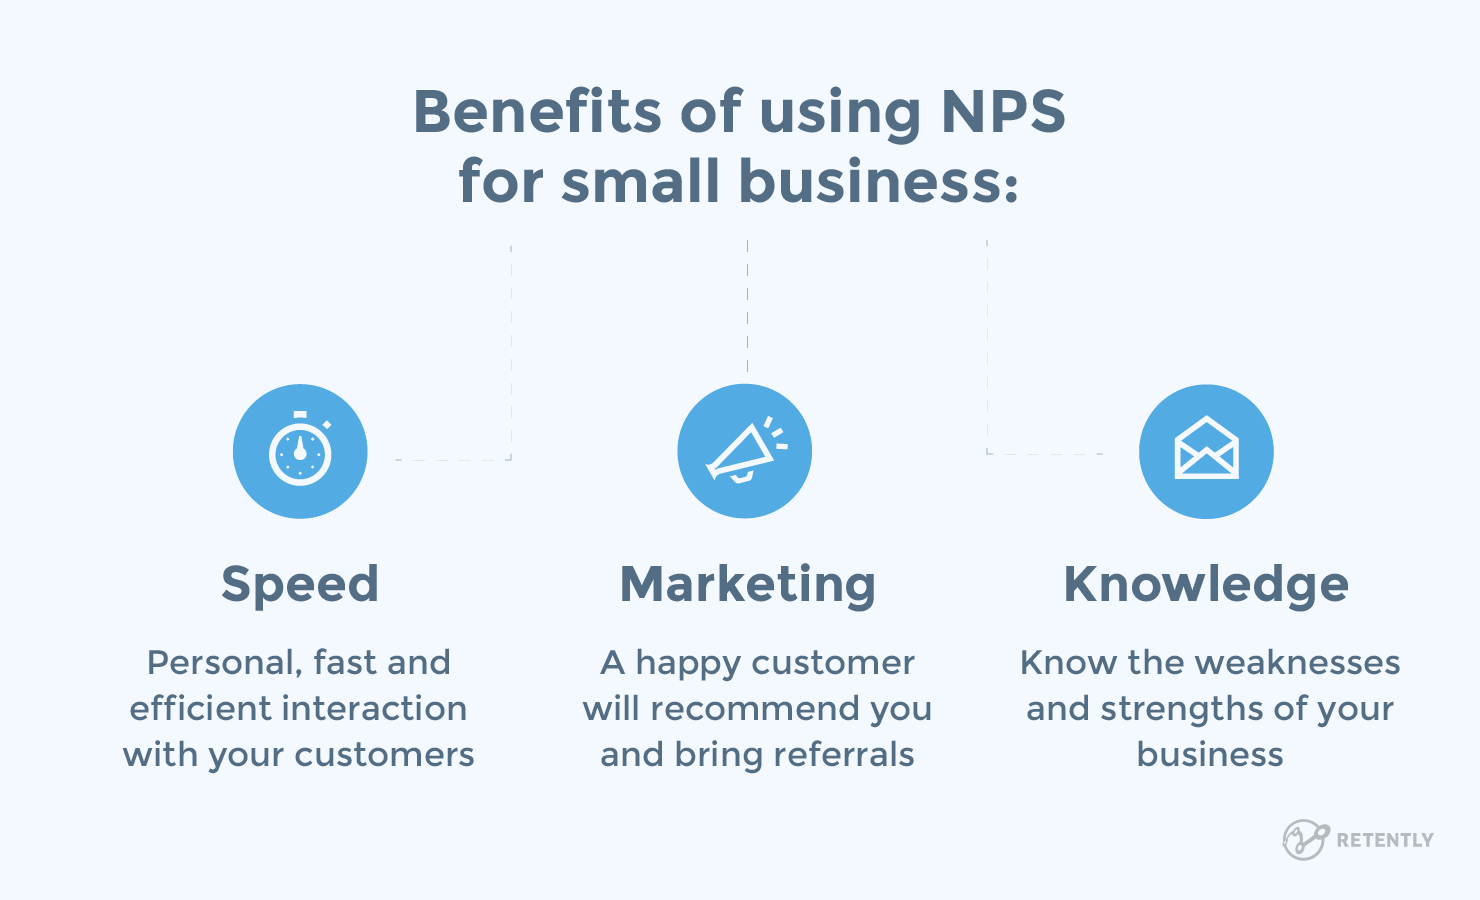 Benefits of using NPS for small businesses